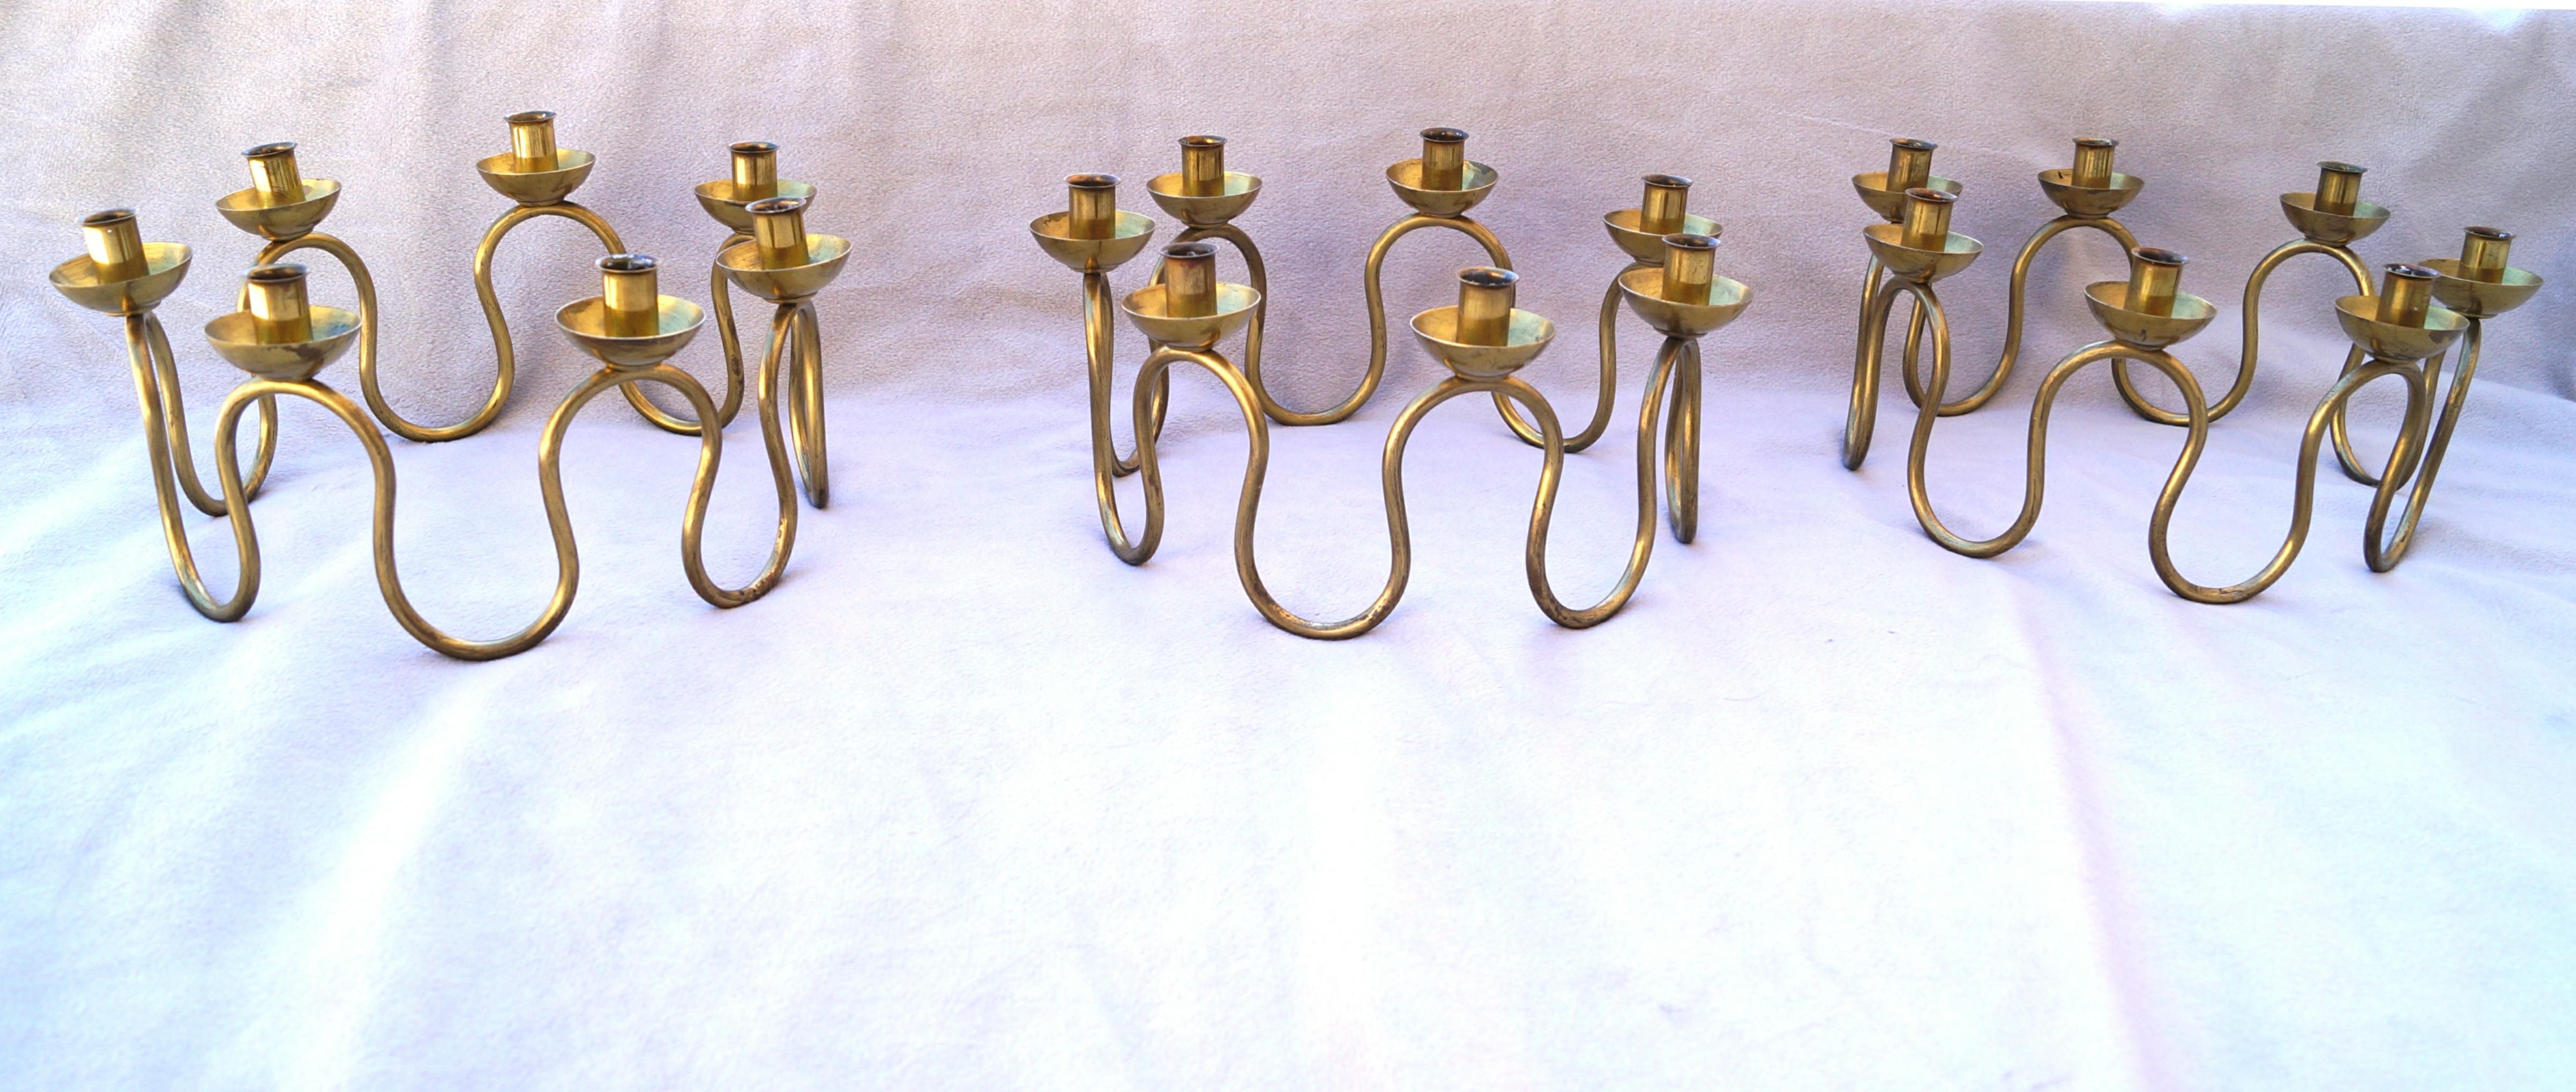 This set of 3 Holmström candlesticks are a beautiful addition to any  décor , particularly during the Swedish tradition of Lucia. Made by Lars Holmström in Arvika . These candlesticks are made of brass with rounded stems , designed to fit slim small